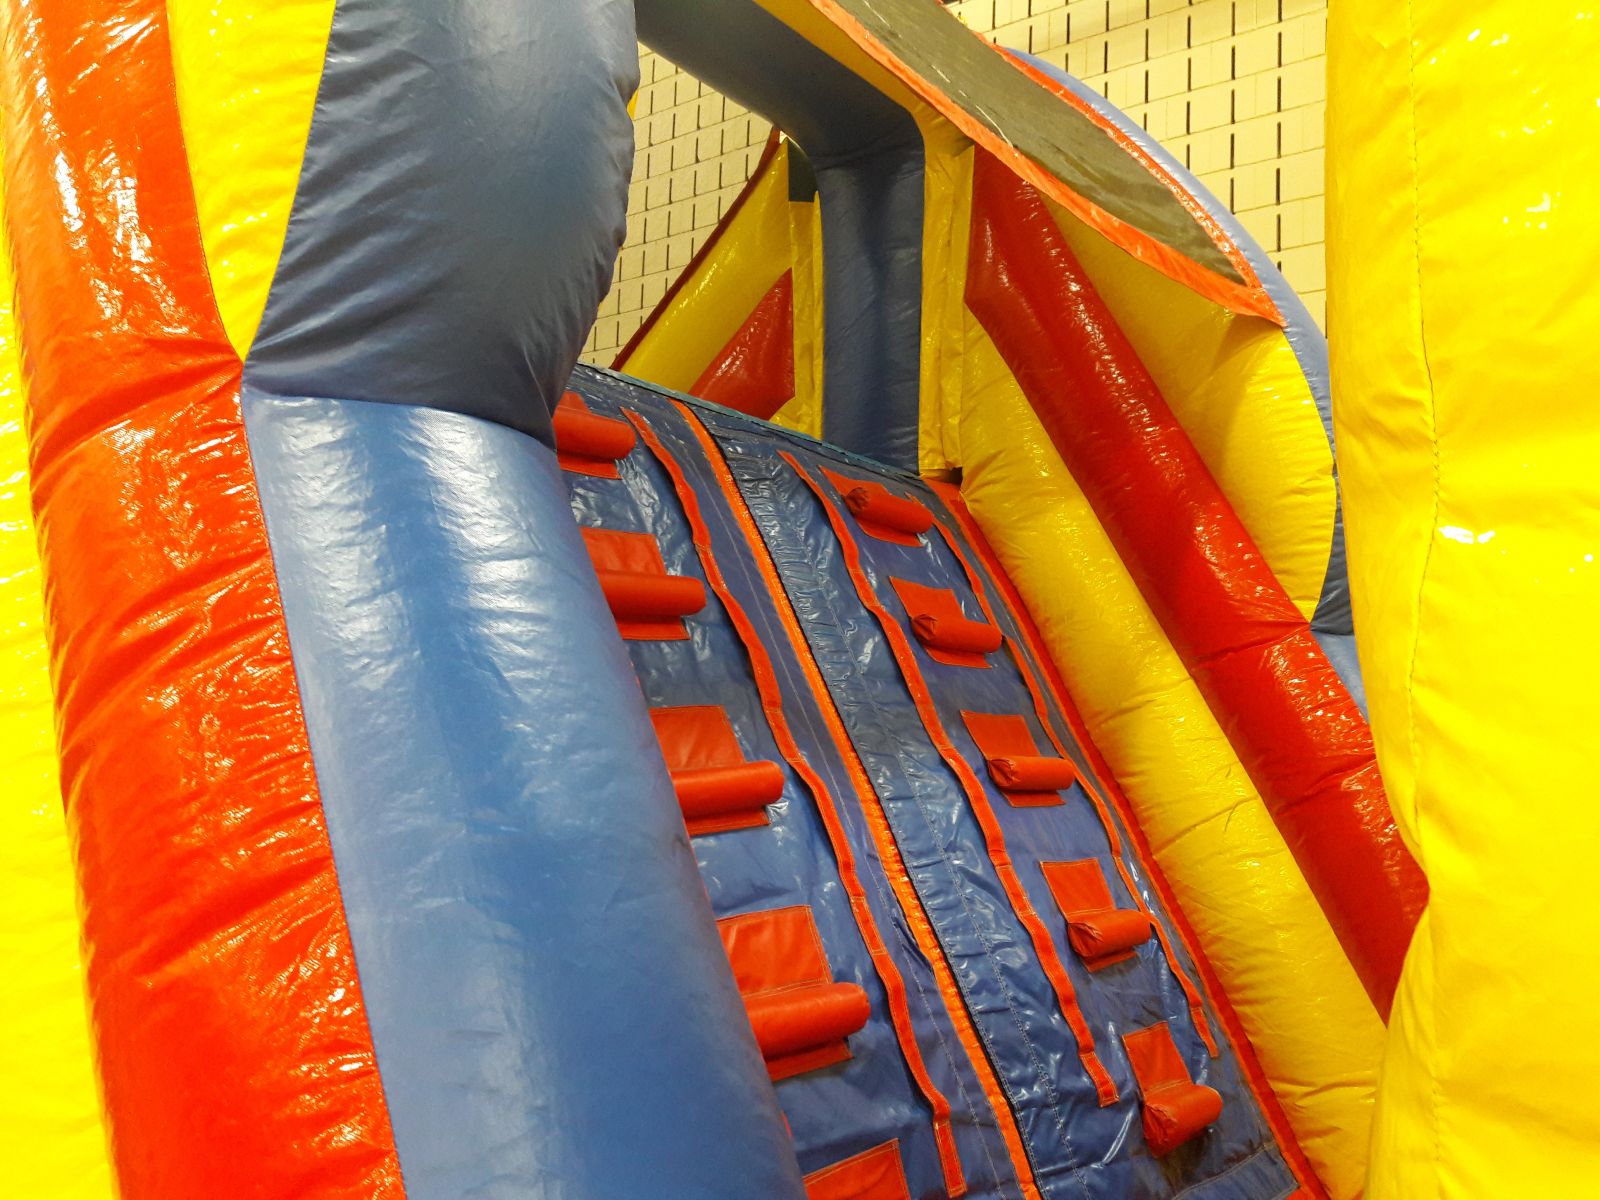 Climbing wall to top of the 13 foot slide on obstacle course